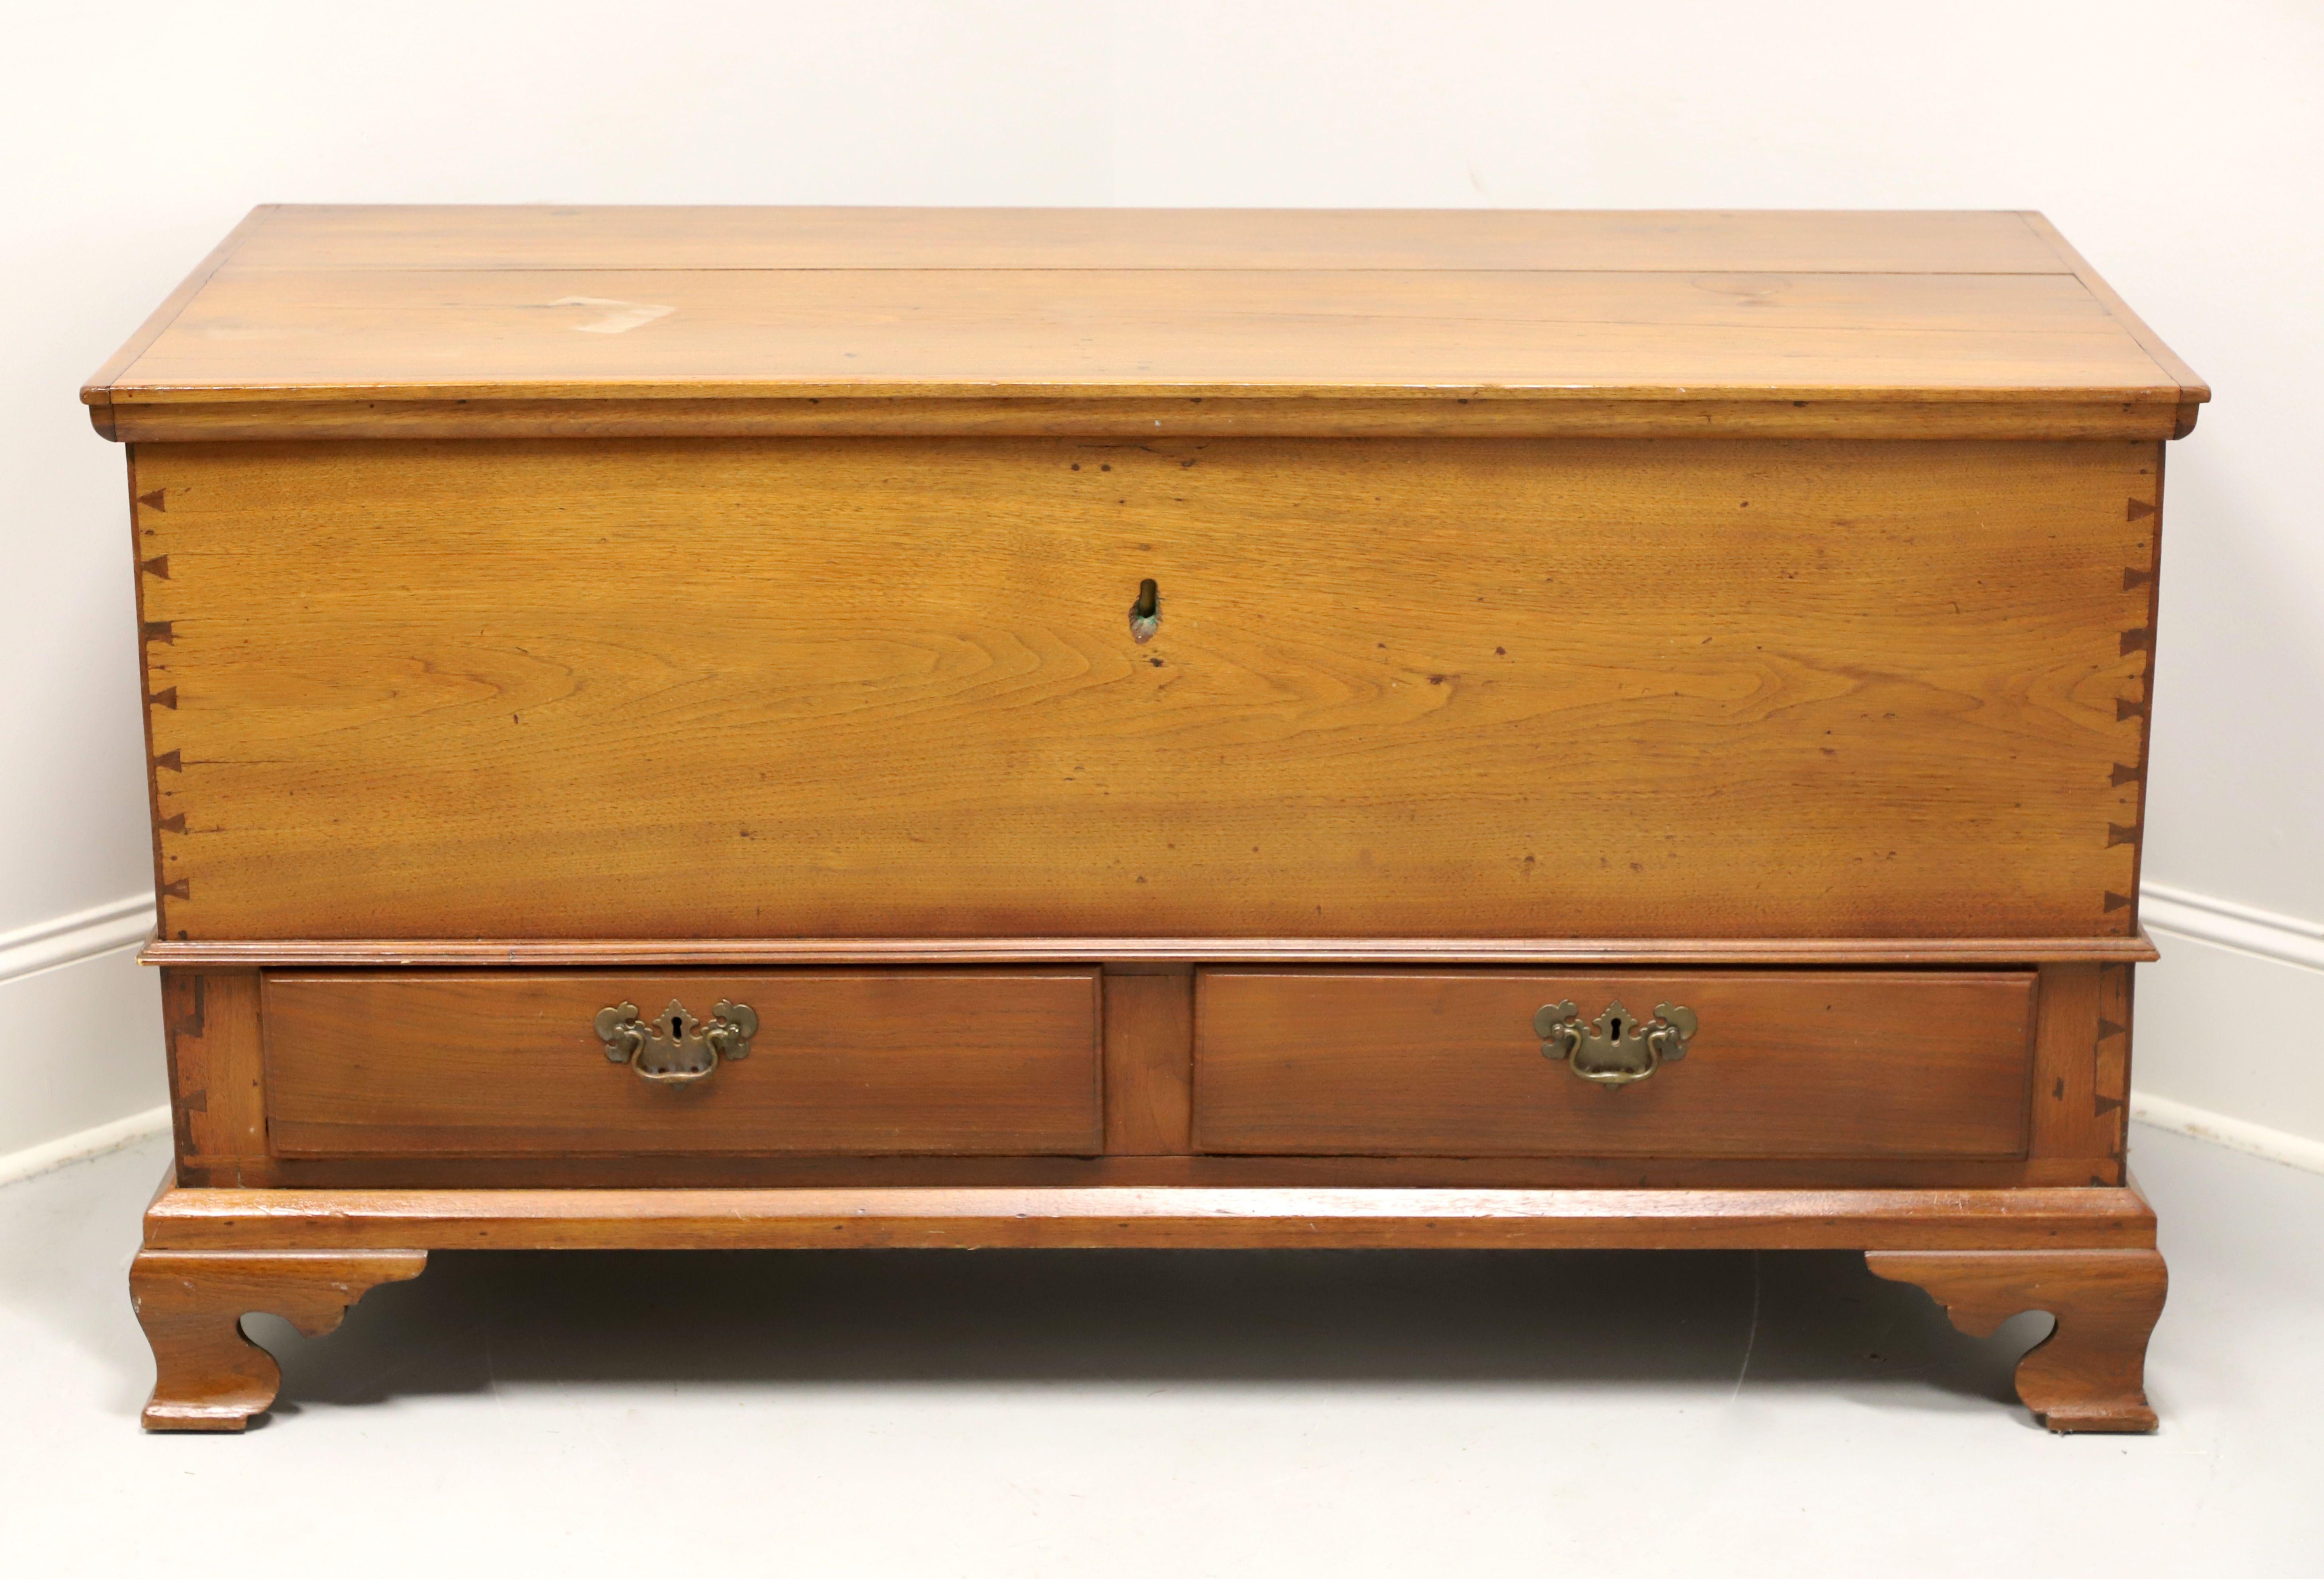 A large antique American Colonial style blanket chest, unbranded. Solid walnut with brass hardware, bevel edge to the lid top, hinge hardware holding the lid, decoratively exposed dovetail joints, lower drawer area, brass side handles, and ogee